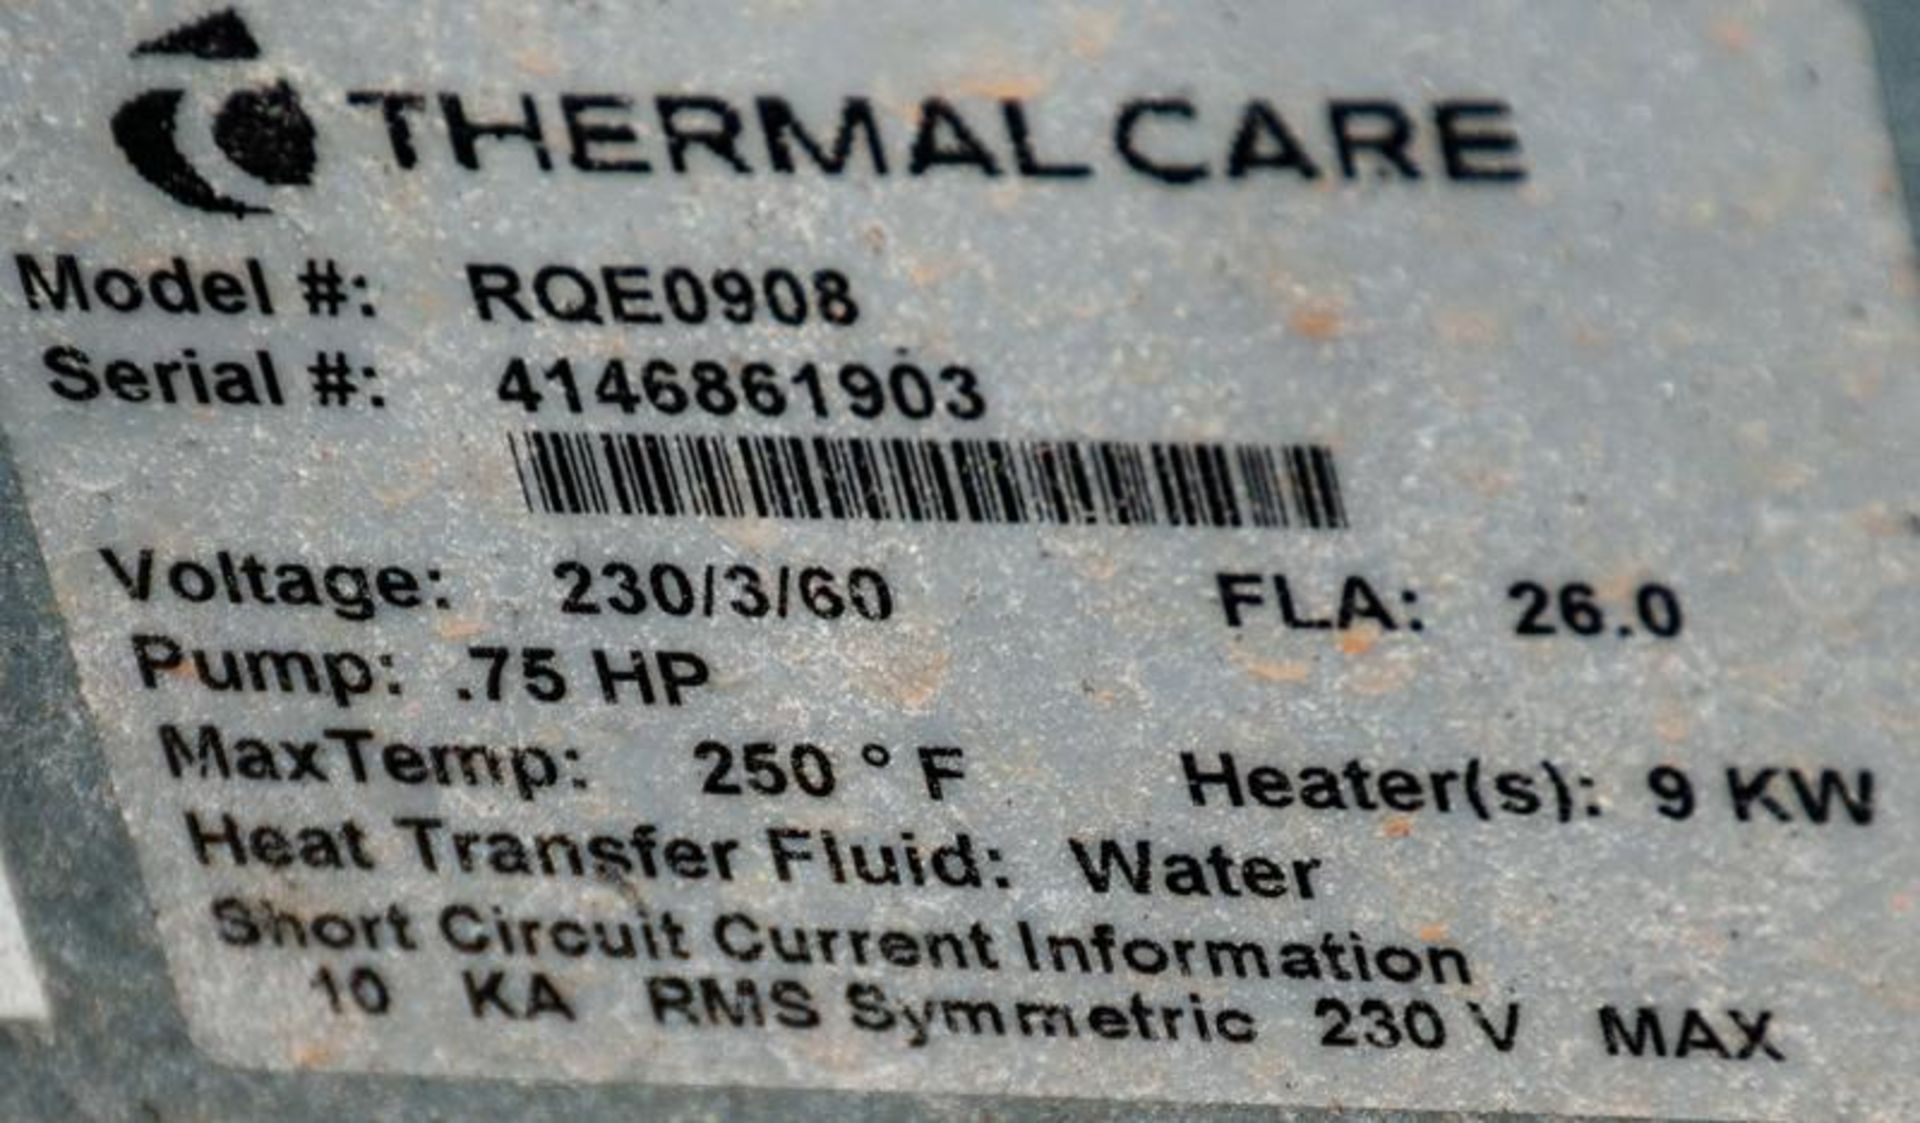 ThermalCare Aquatherm RQE Mold temperature controller, 230v 3ph, Mdl RQE0908, s/n 4146861903, 3/4 hp - Image 3 of 3